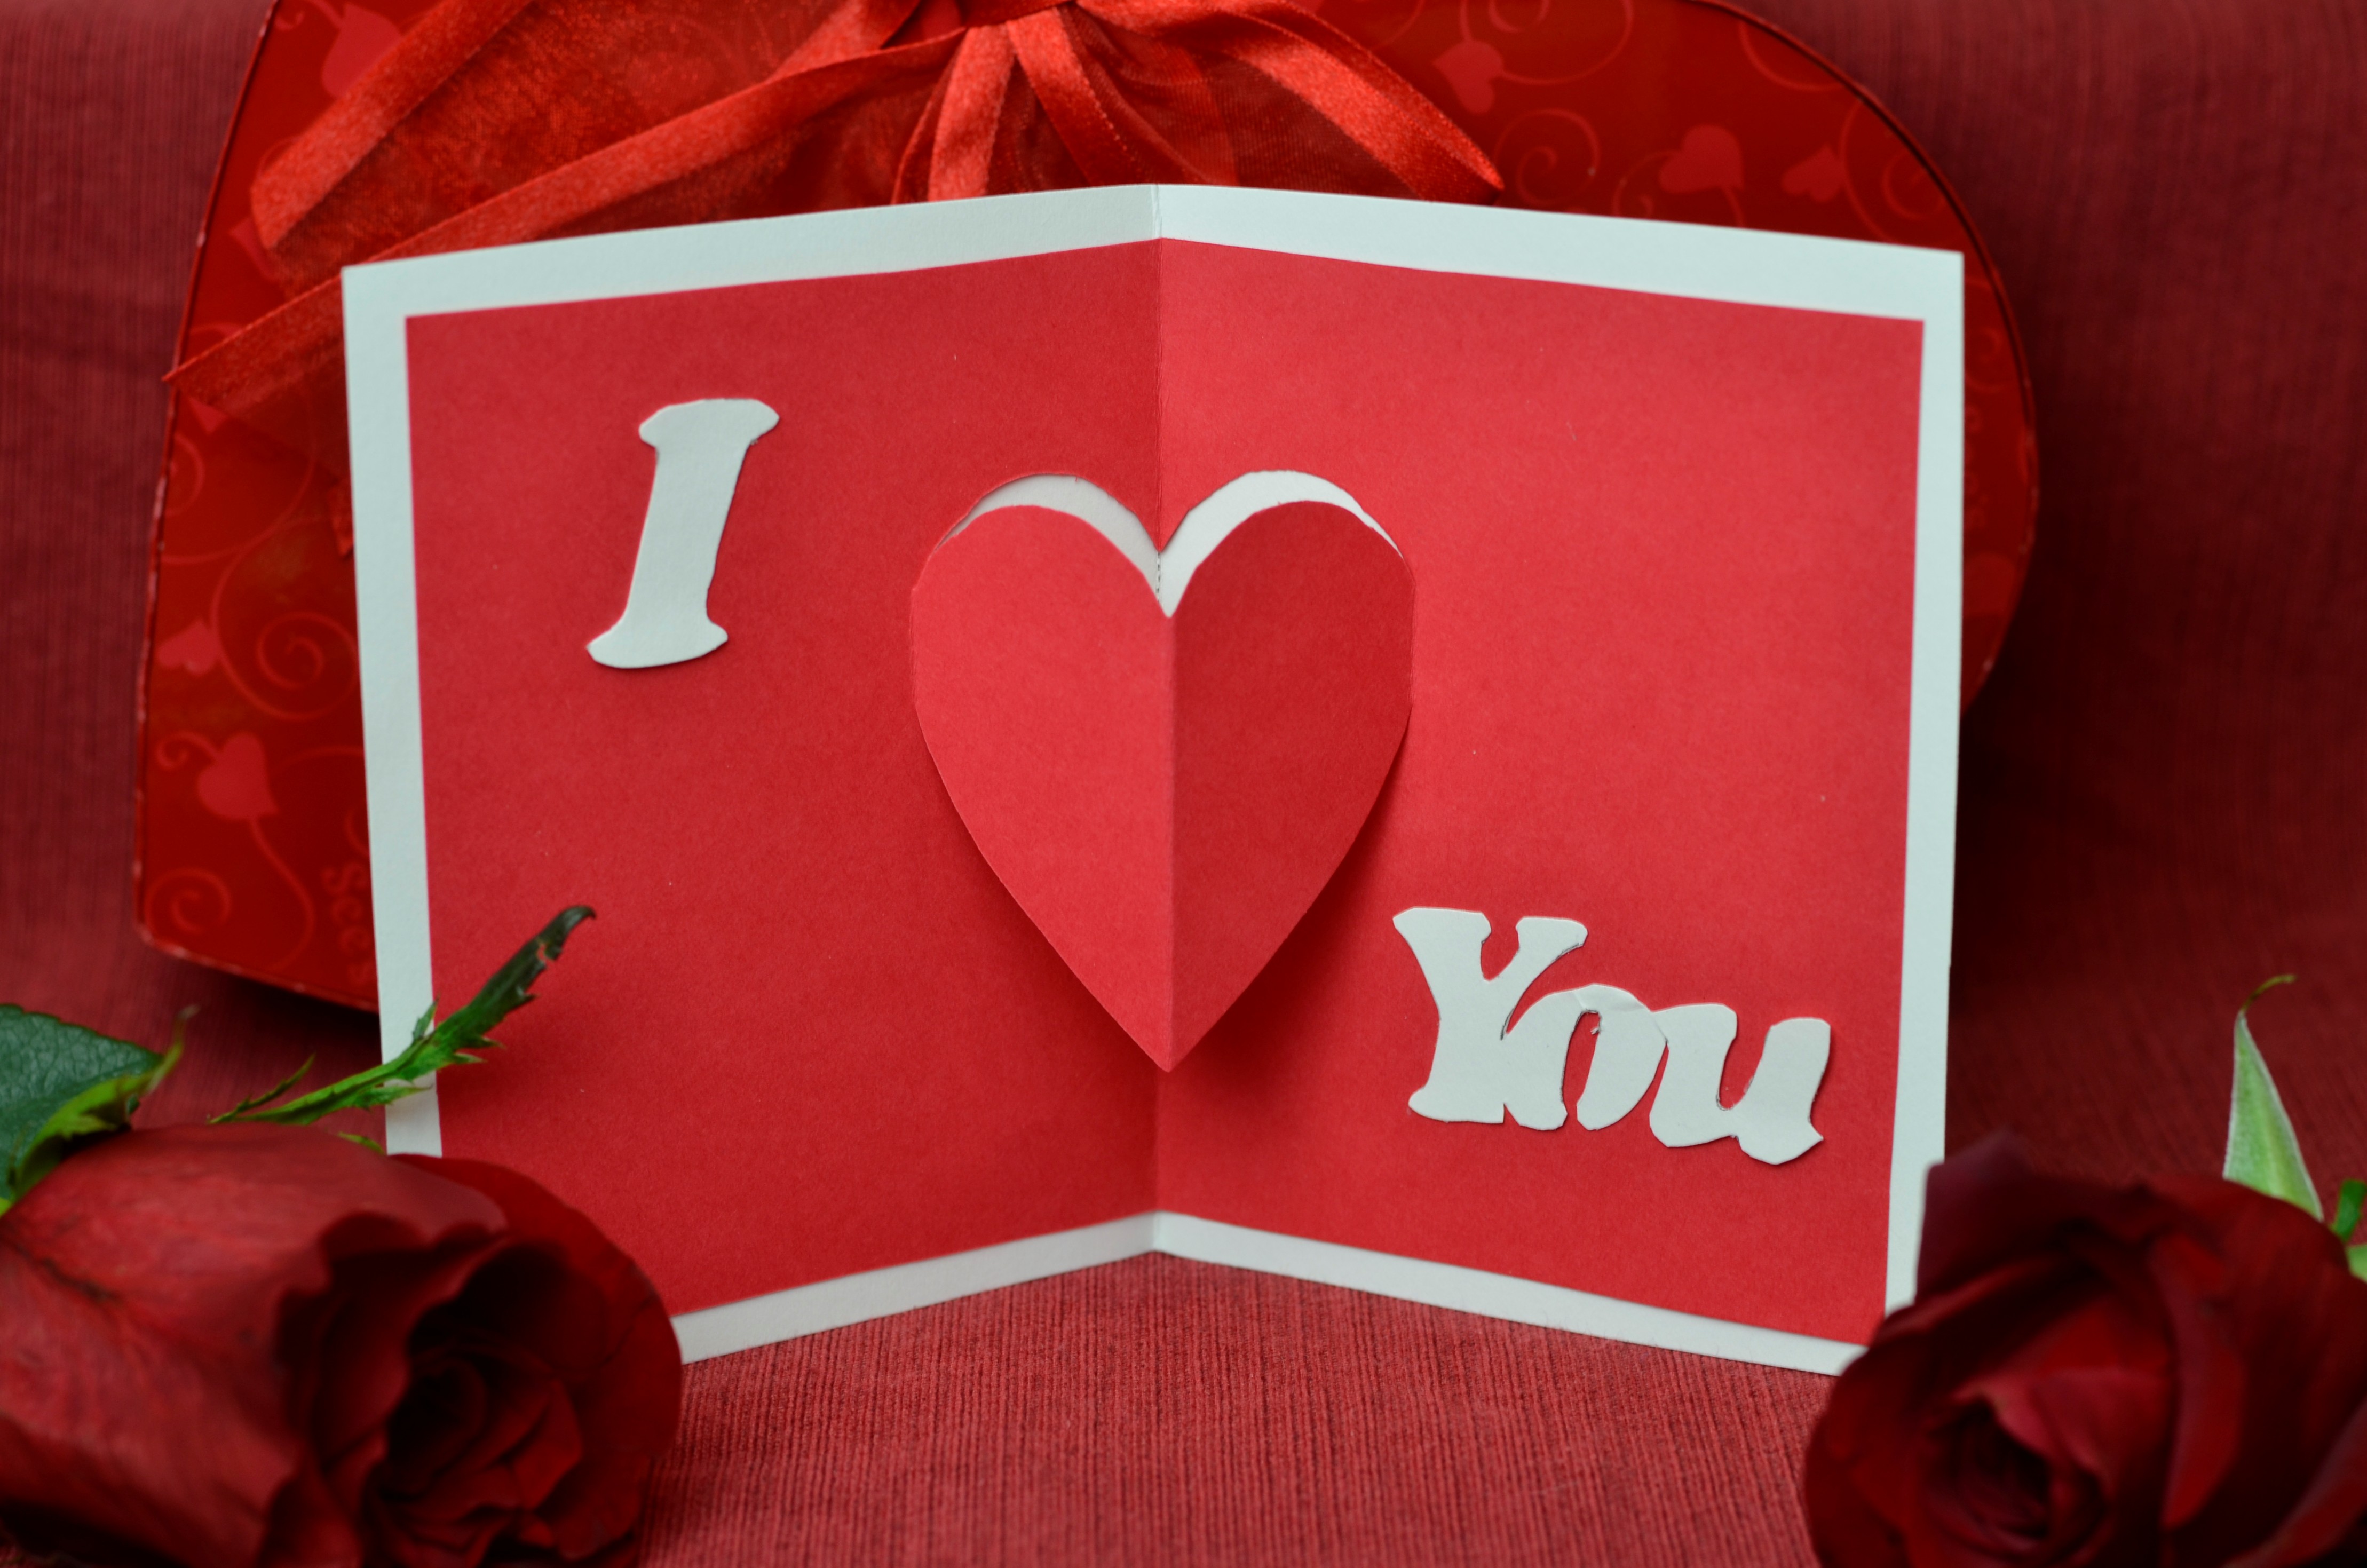 Top 10 Ideas for Valentine's Day Cards - Creative Pop Up Cards.